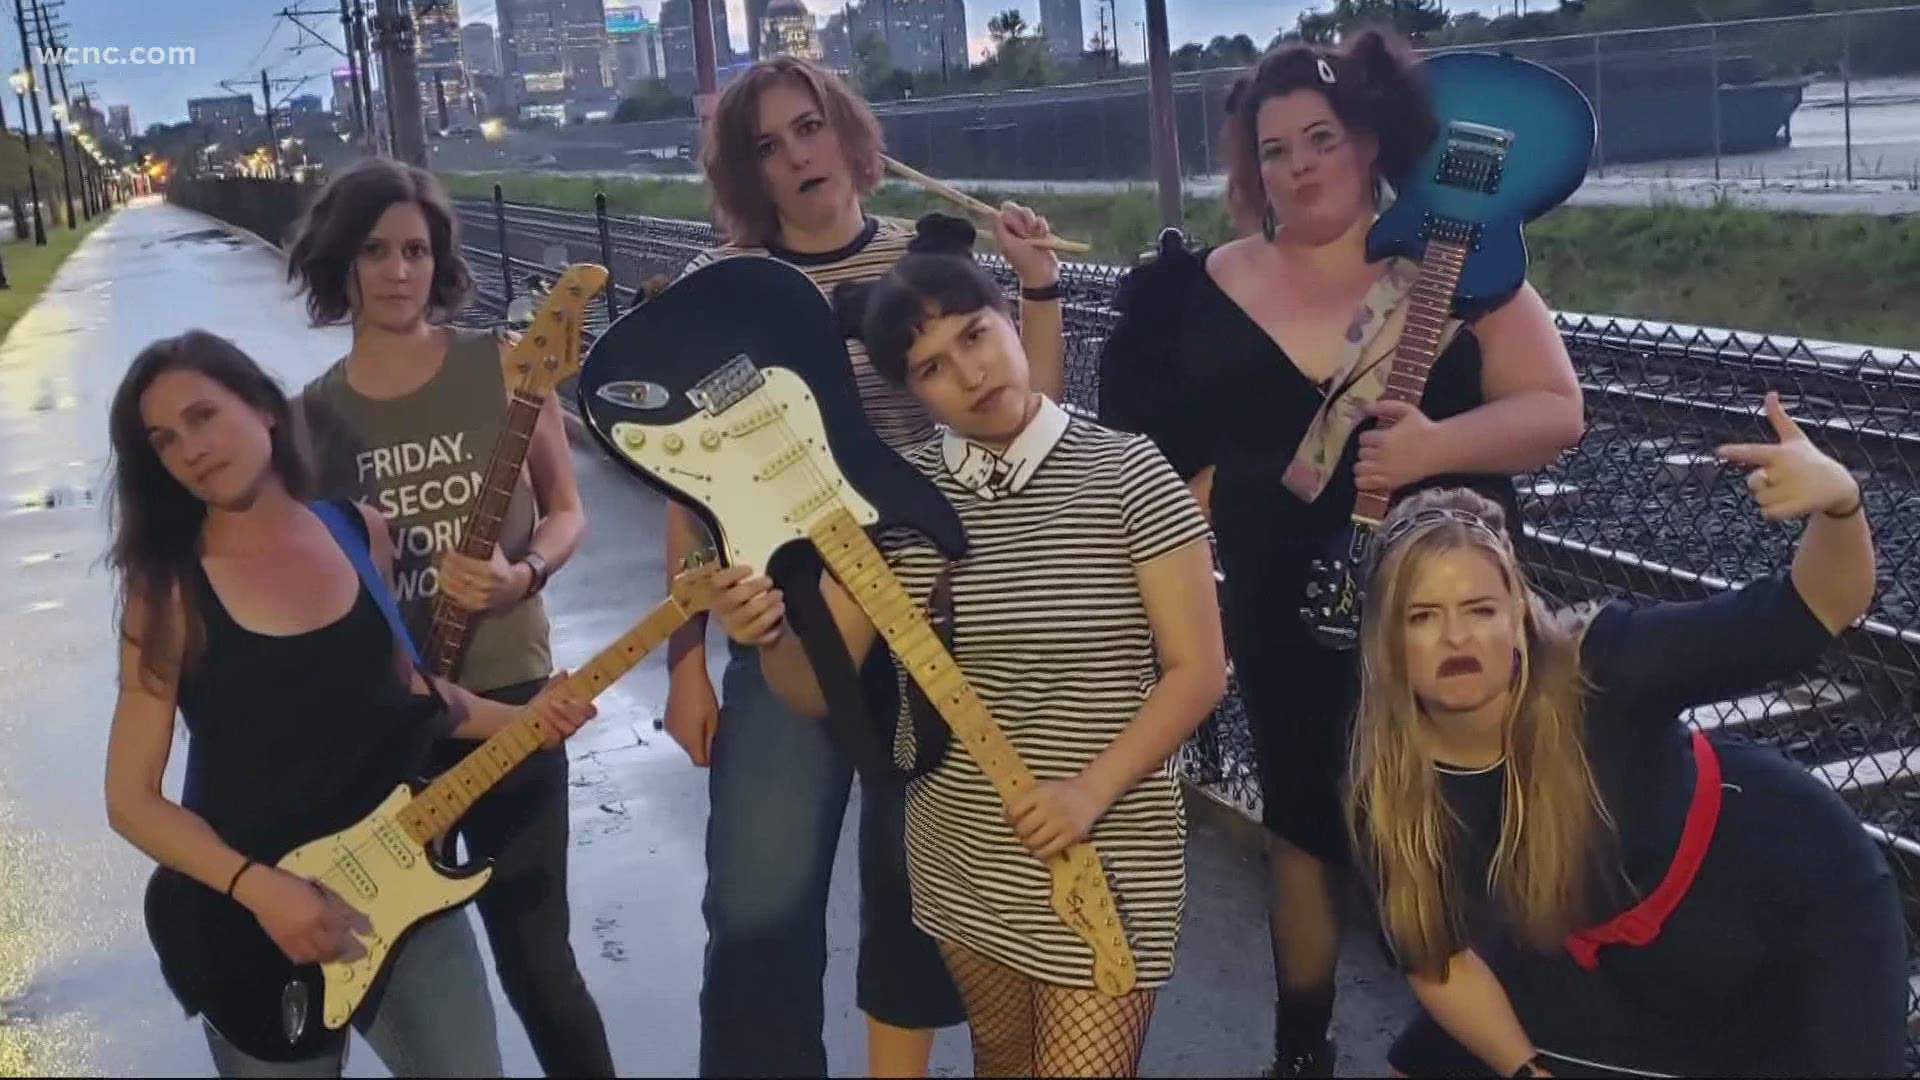 The Lady Rockstars have been learning instruments and playing in a band during the pandemic, all online. It's connecting women across continents.